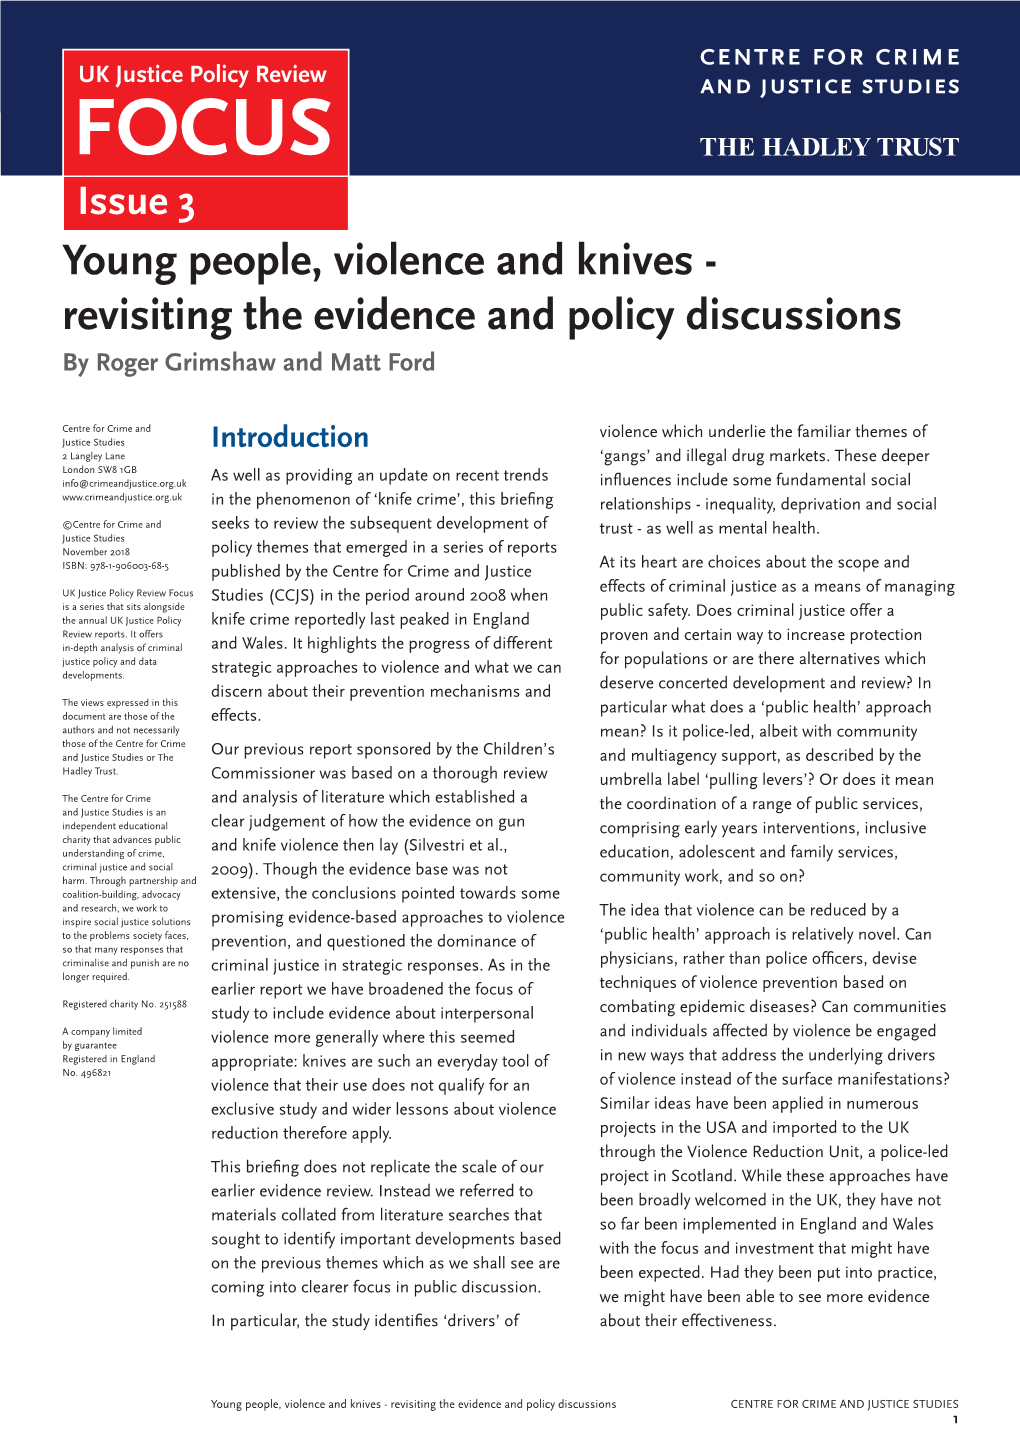 Young People, Violence and Knives - Revisiting the Evidence and Policy Discussions by Roger Grimshaw and Matt Ford